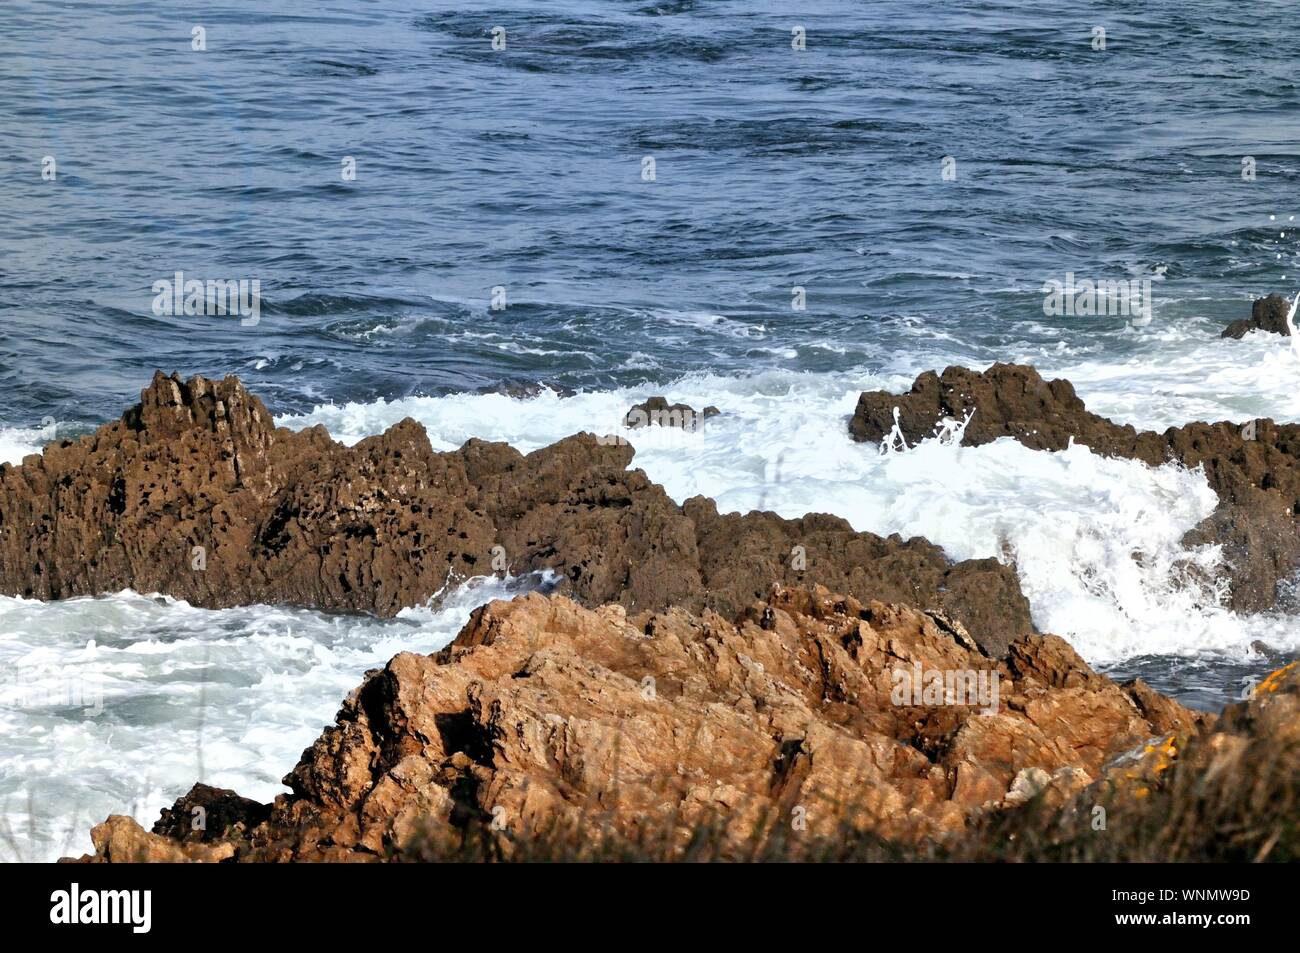 Waves of the Atlantic ocean hitting the french coast rocks and forming swirls in a peaceful but powerful atmosphere calling for Freedom and Infinity. Stock Photo